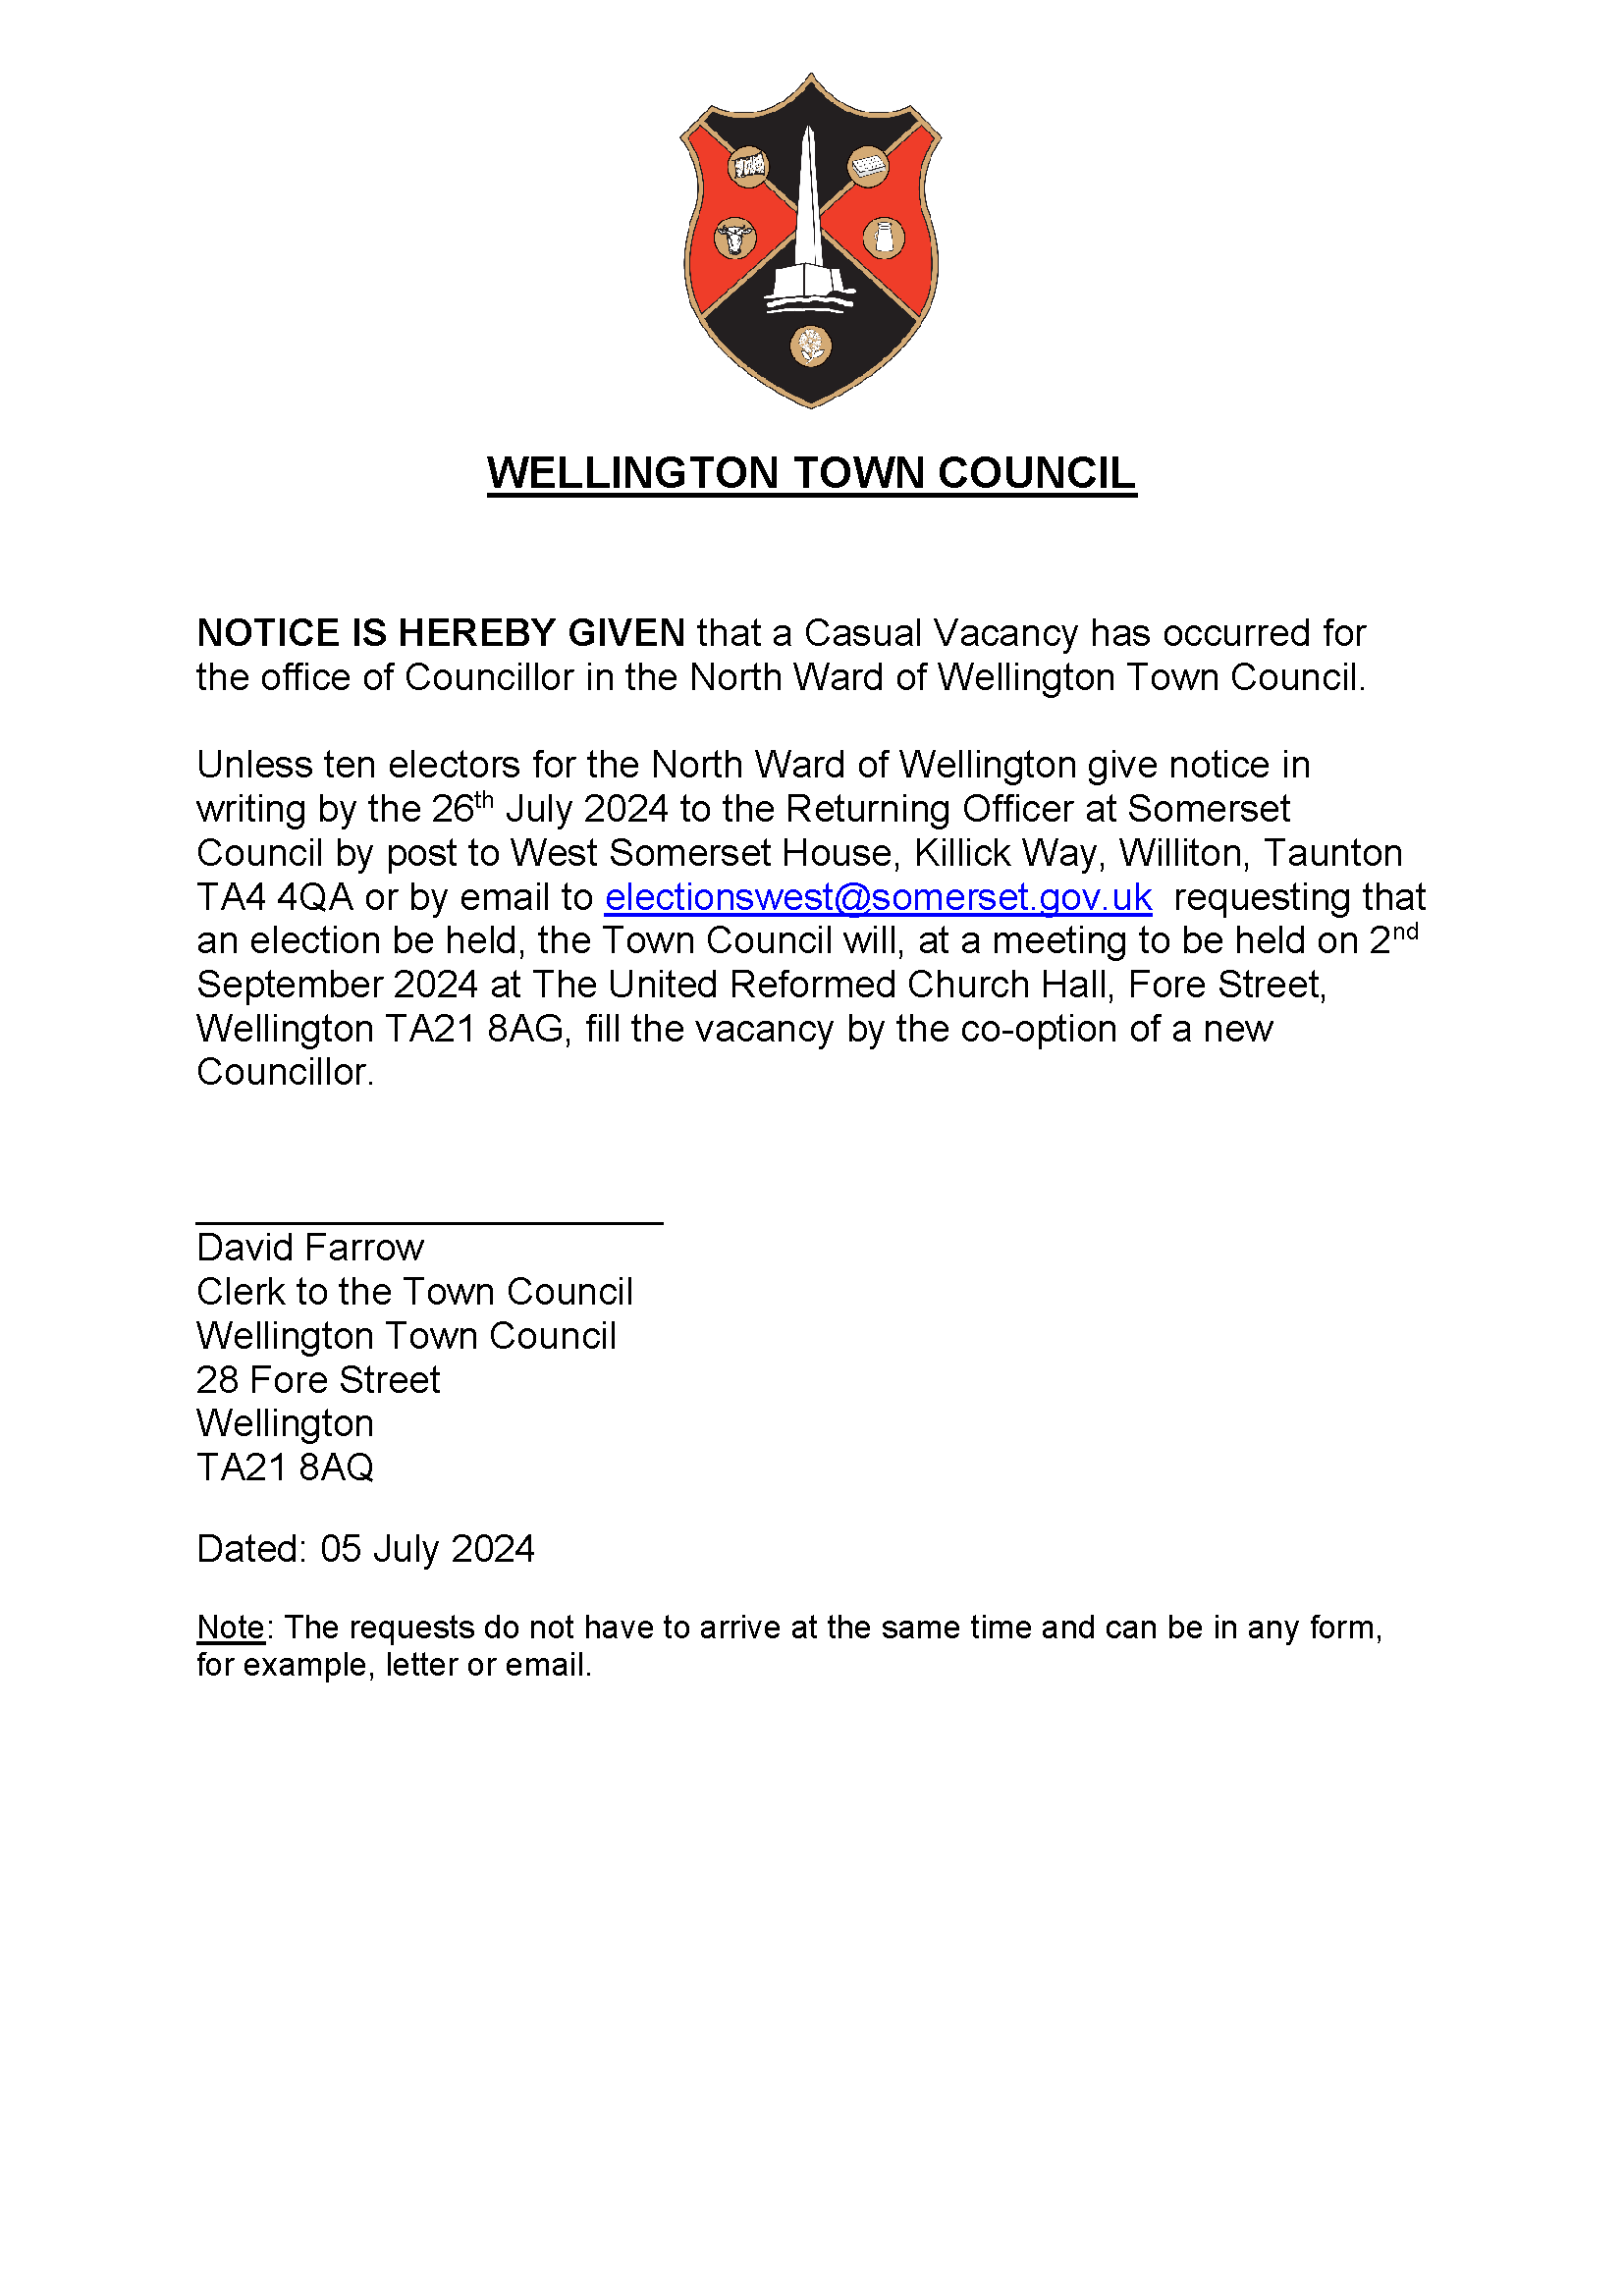 WELLINGTON TOWN COUNCIL NOTICE IS HEREBY GIVEN that a Casual Vacancy has occurred for the office of Councillor in the North Ward of Wellington Town Council. Unless ten electors for the North Ward of Wellington give notice in writing by the 26th July 2024 to the Returning Officer at Somerset Council by post to West Somerset House, Killick Way, Williton, Taunton TA4 4QA or by email to electionswest@somerset.gov.uk requesting that an election be held, the Town Council will, at a meeting to be held on 2nd September 2024 at The United Reformed Church Hall, Fore Street, Wellington TA21 8AG, fill the vacancy by the co-option of a new Councillor. ______________________ David Farrow Clerk to the Town Council Wellington Town Council 28 Fore Street Wellington TA21 8AQ Dated: 05 July 2024 Note: The requests do not have to arrive at the same time and can be in any form, for example, letter or email. 